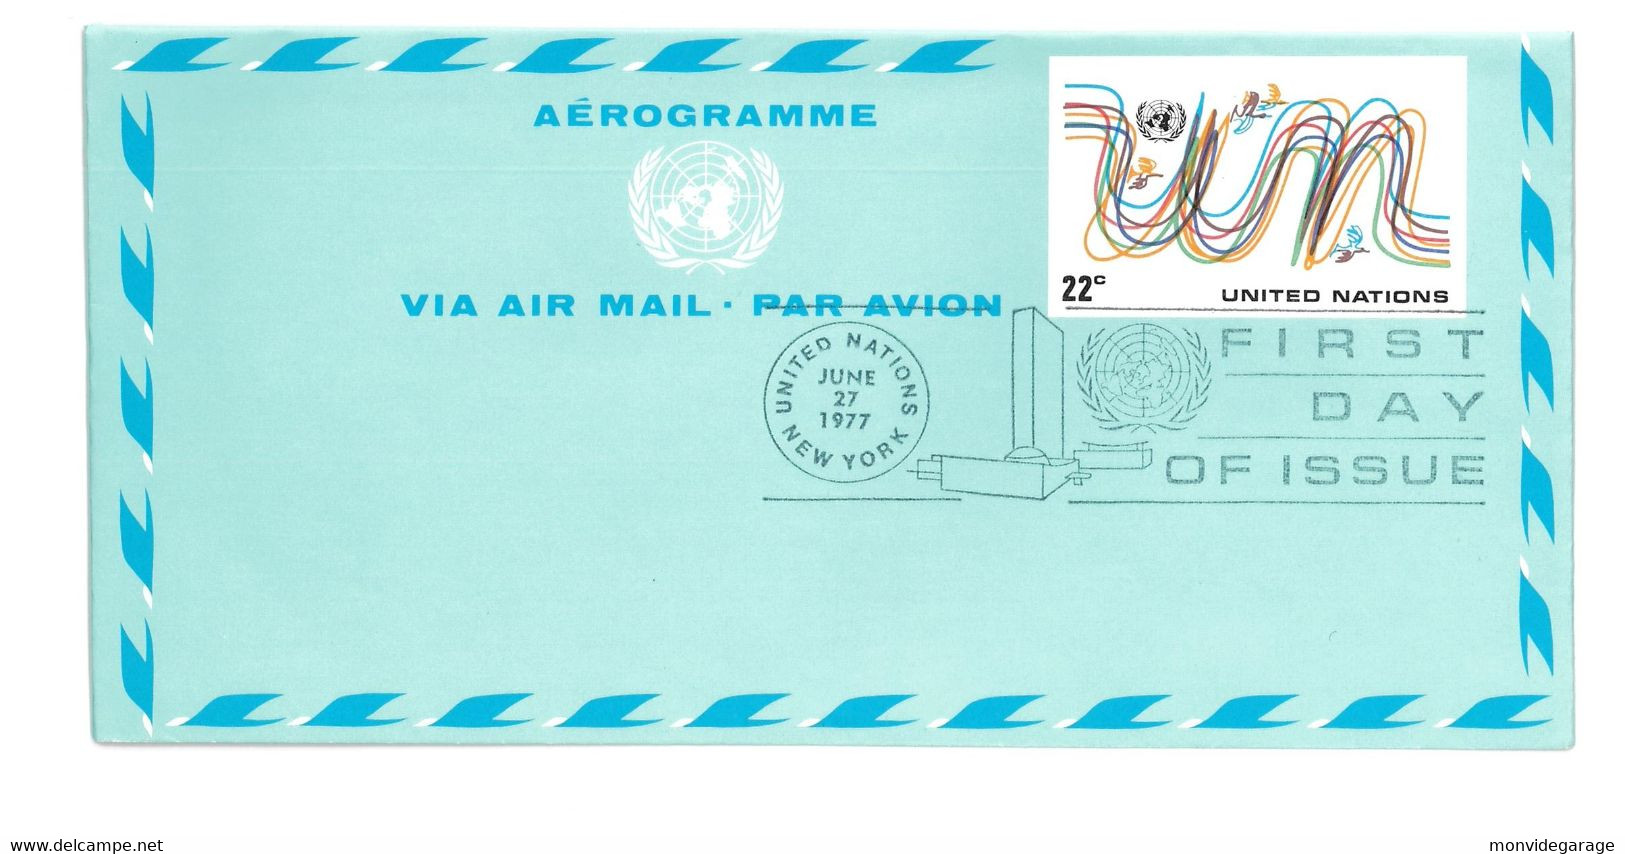 United Nations - Aérogramme - Via Air Mail - Par Avion - First Day Of Issue - 1977 - New York 093 - Luchtpost